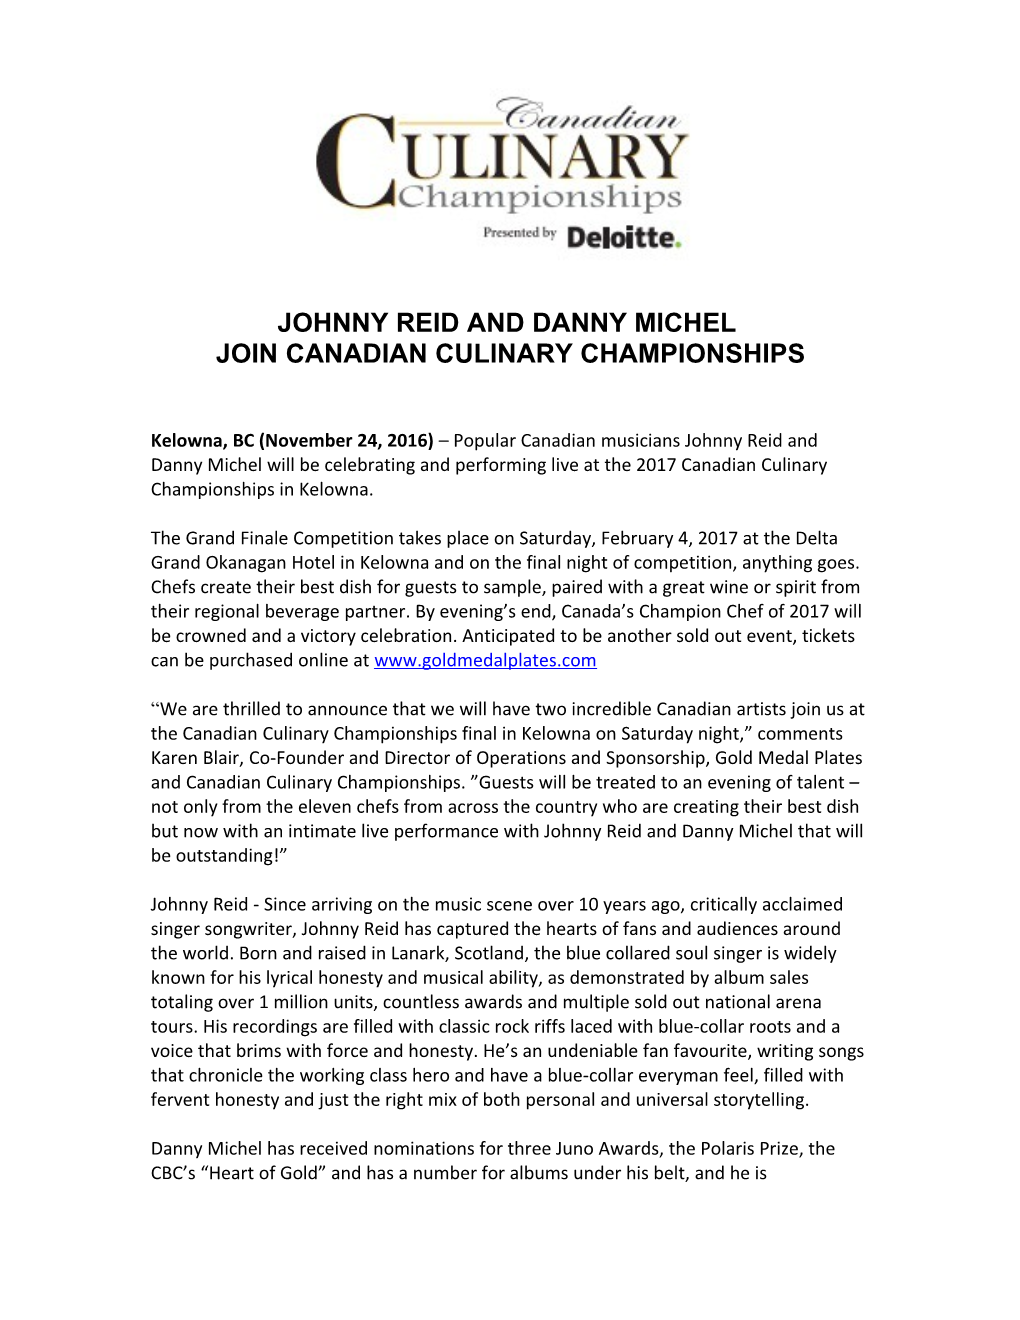 Johnny Reid and Danny Michel Join Canadian Culinary Championships